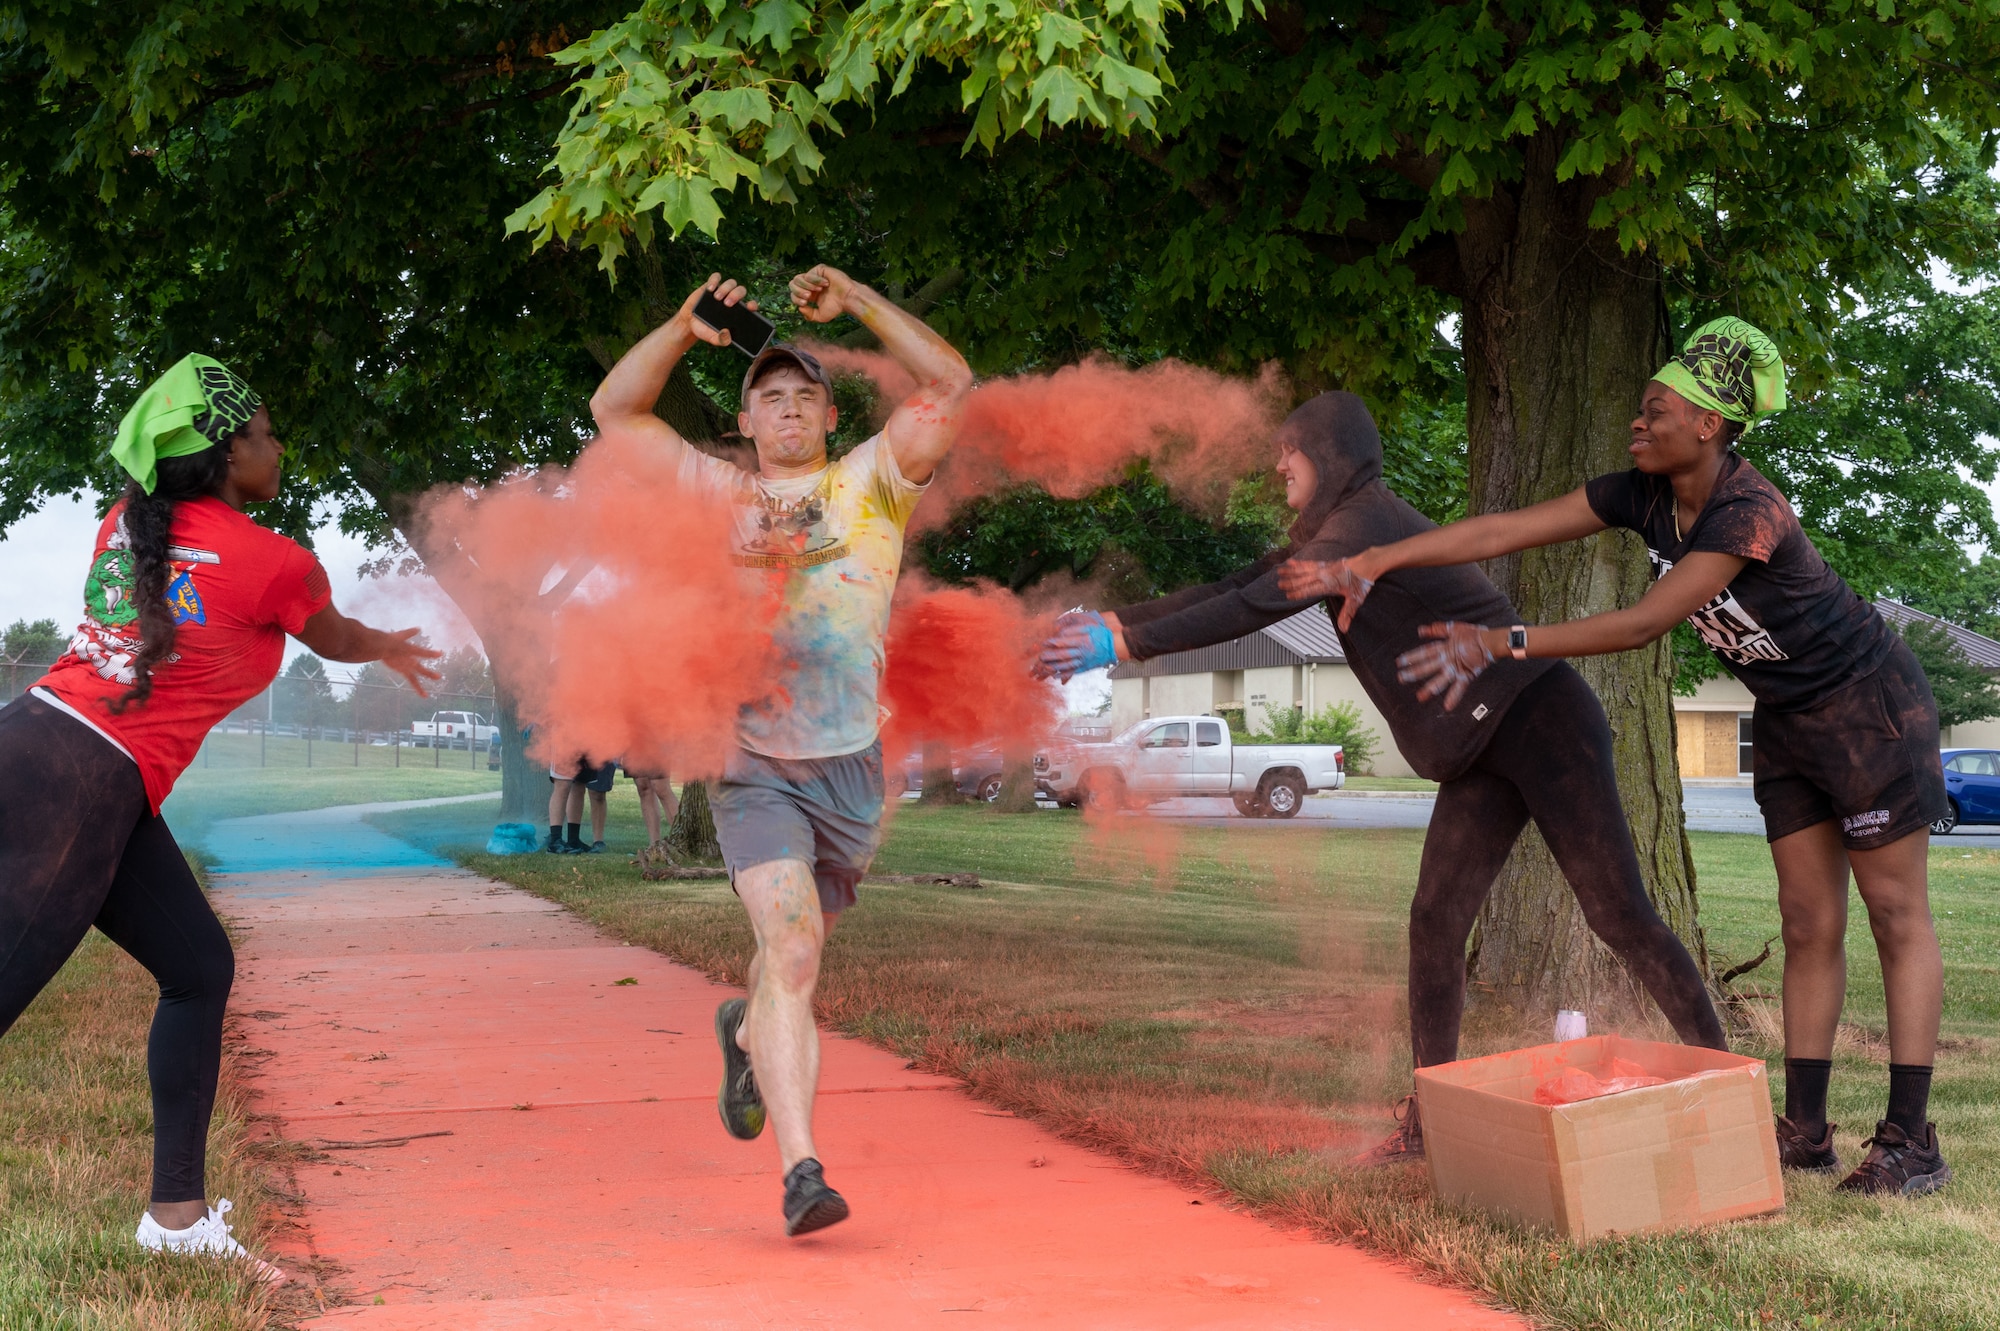 A member of Team Dover gets doused with powder during the Sexual Assault Prevention and Response Color Run at Dover Air Force Base, Delaware, June 24, 2022. SAPR color runs support the implementation of Sexual Assault Awareness Month activities and outreach beyond April. (U.S. Air Force photo by Airman 1st Class Cydney Lee)